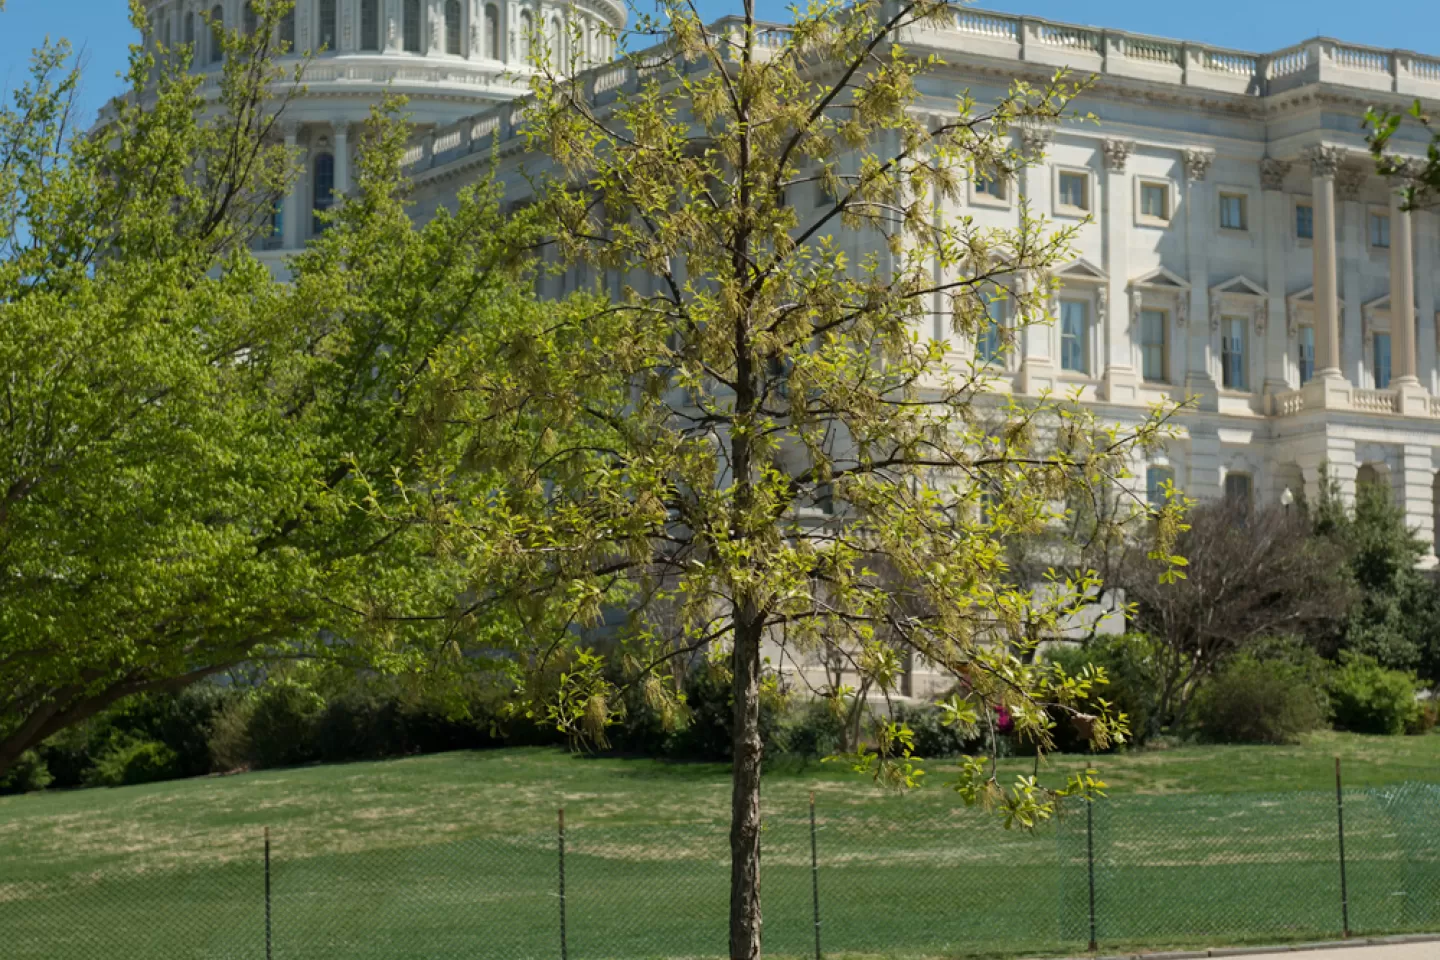 The September 11 Anniversary Tree in spring.